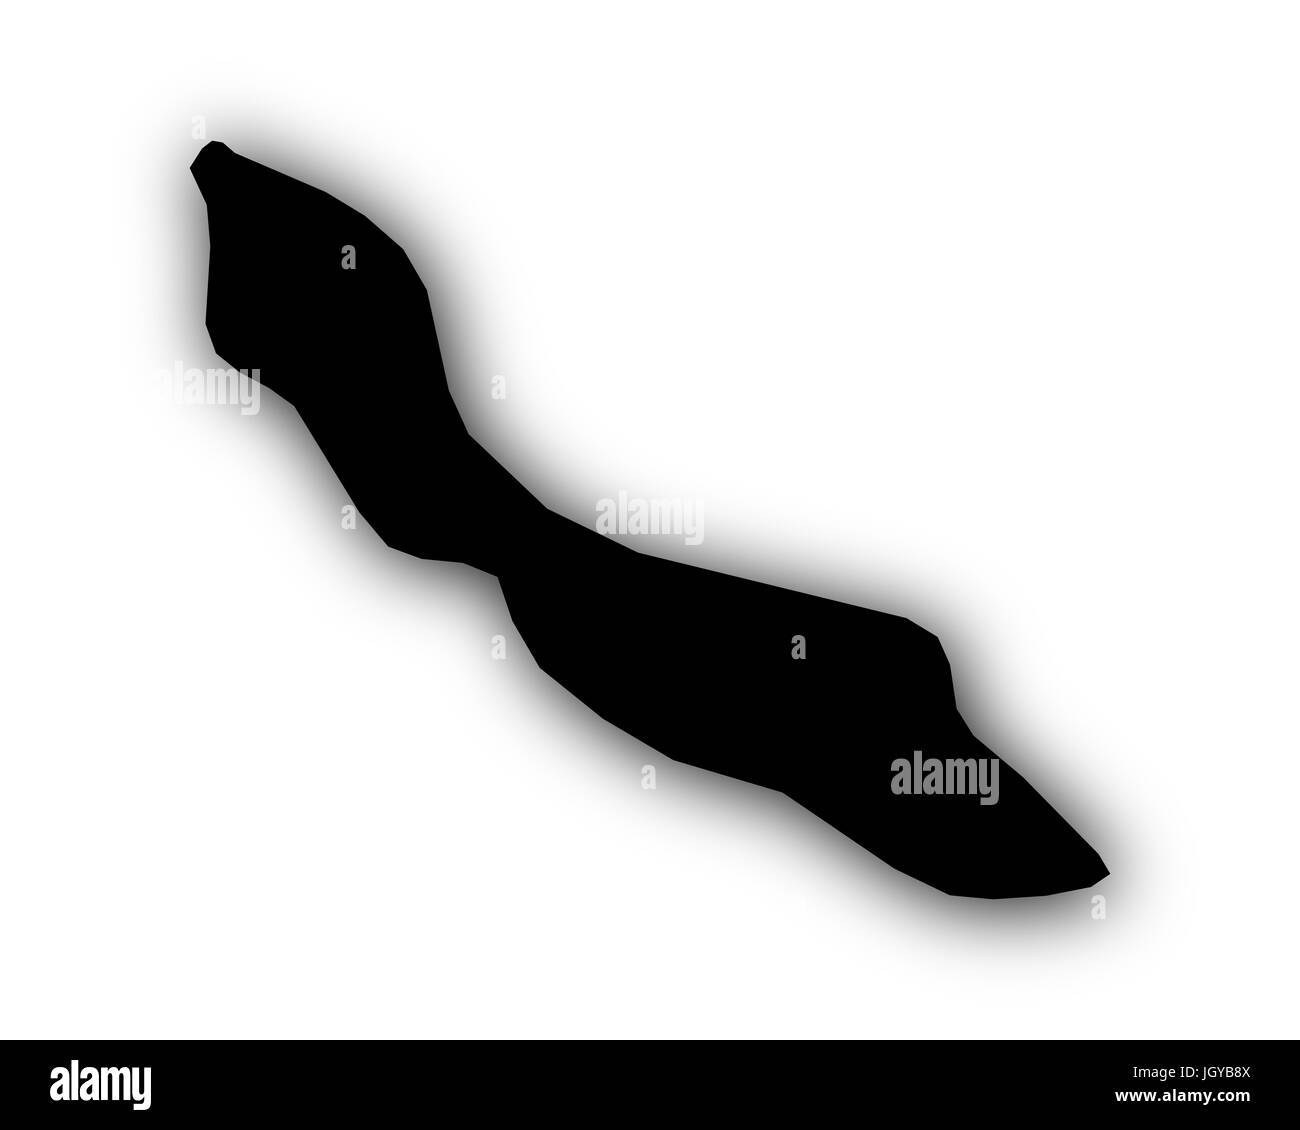 Map of Curacao with shadow Stock Photo